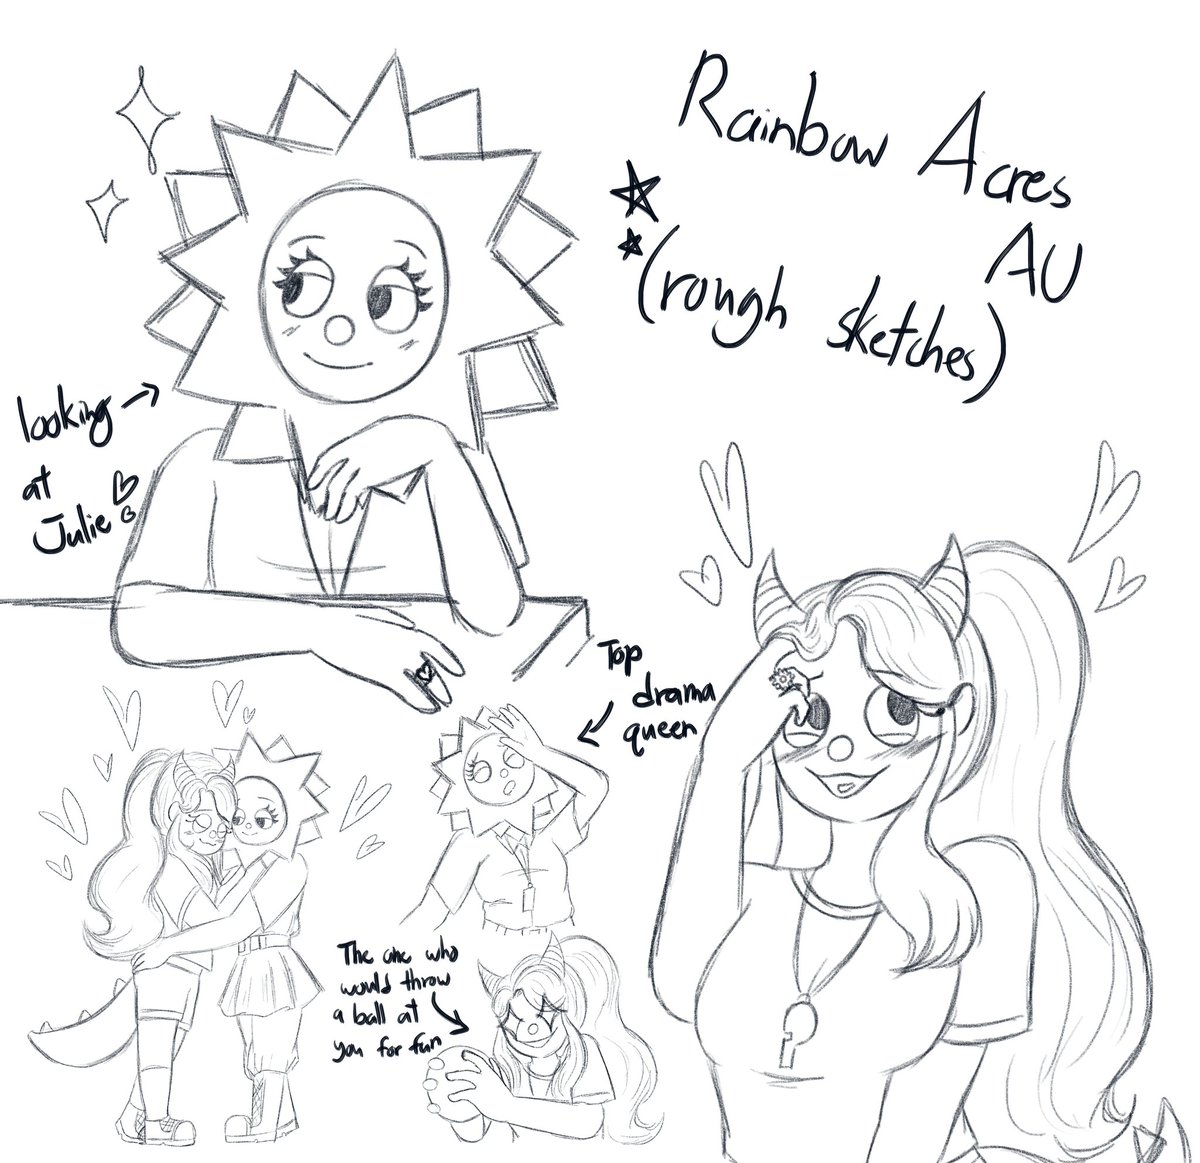 Rainbow Acres AU rough sketches!!

✨T H R E A D✨

[NOTE: Rainbow Acres AU is just the renamed version of Children's Camp AU (credits to my friend who helped me with that name)]
#WelcomeHome #WelcomeHomeAU #RainbowAcresAU #SallyStarlet #JulieJoyful #roughsketch #art #fyptt